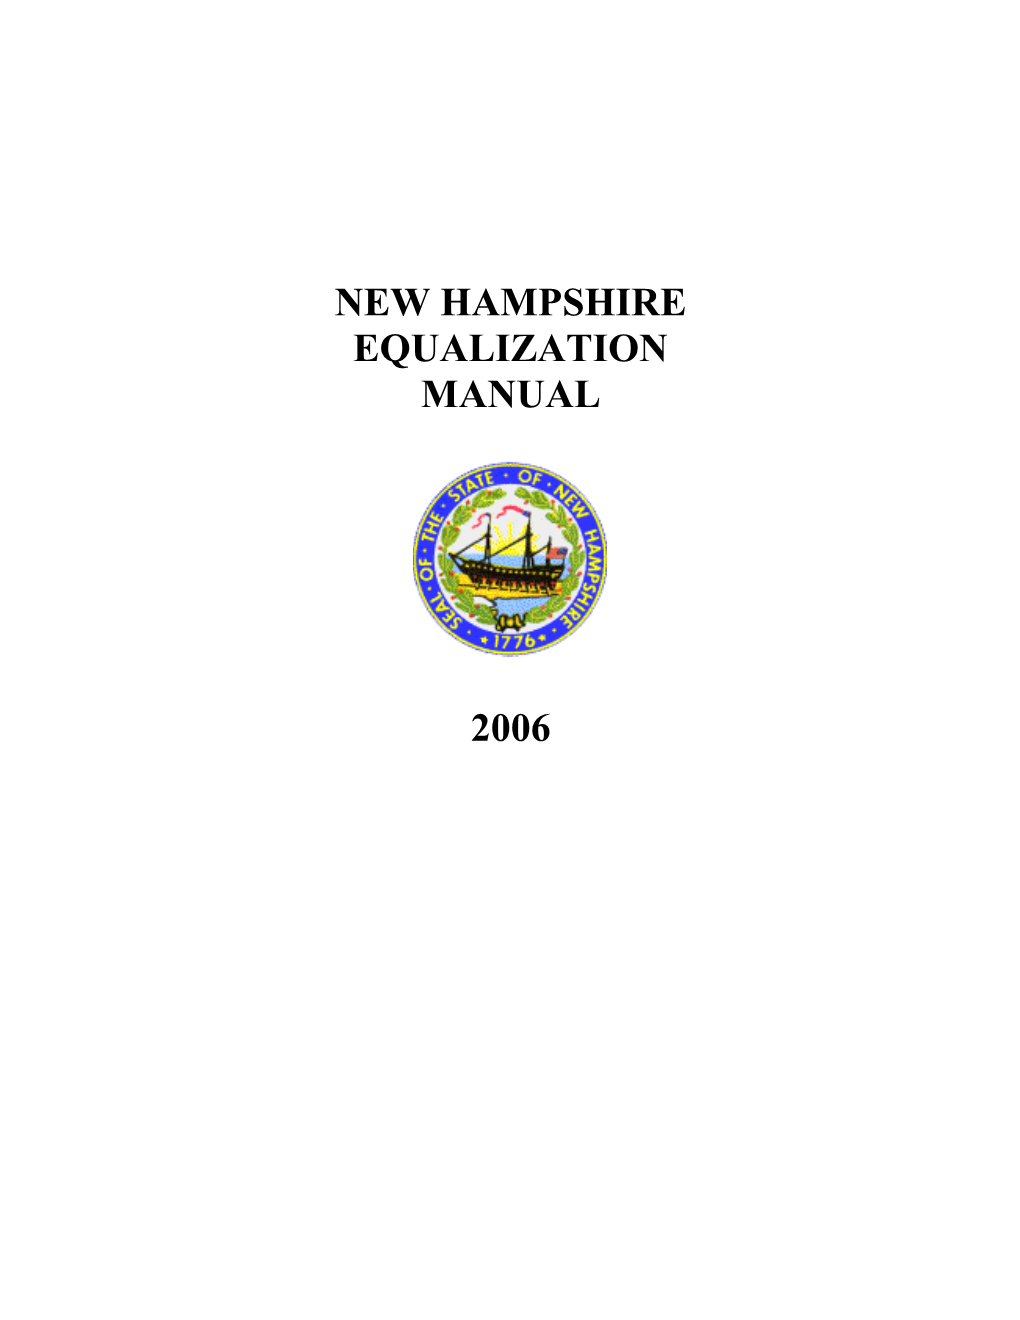 Adopted by the Equalization Standards Board